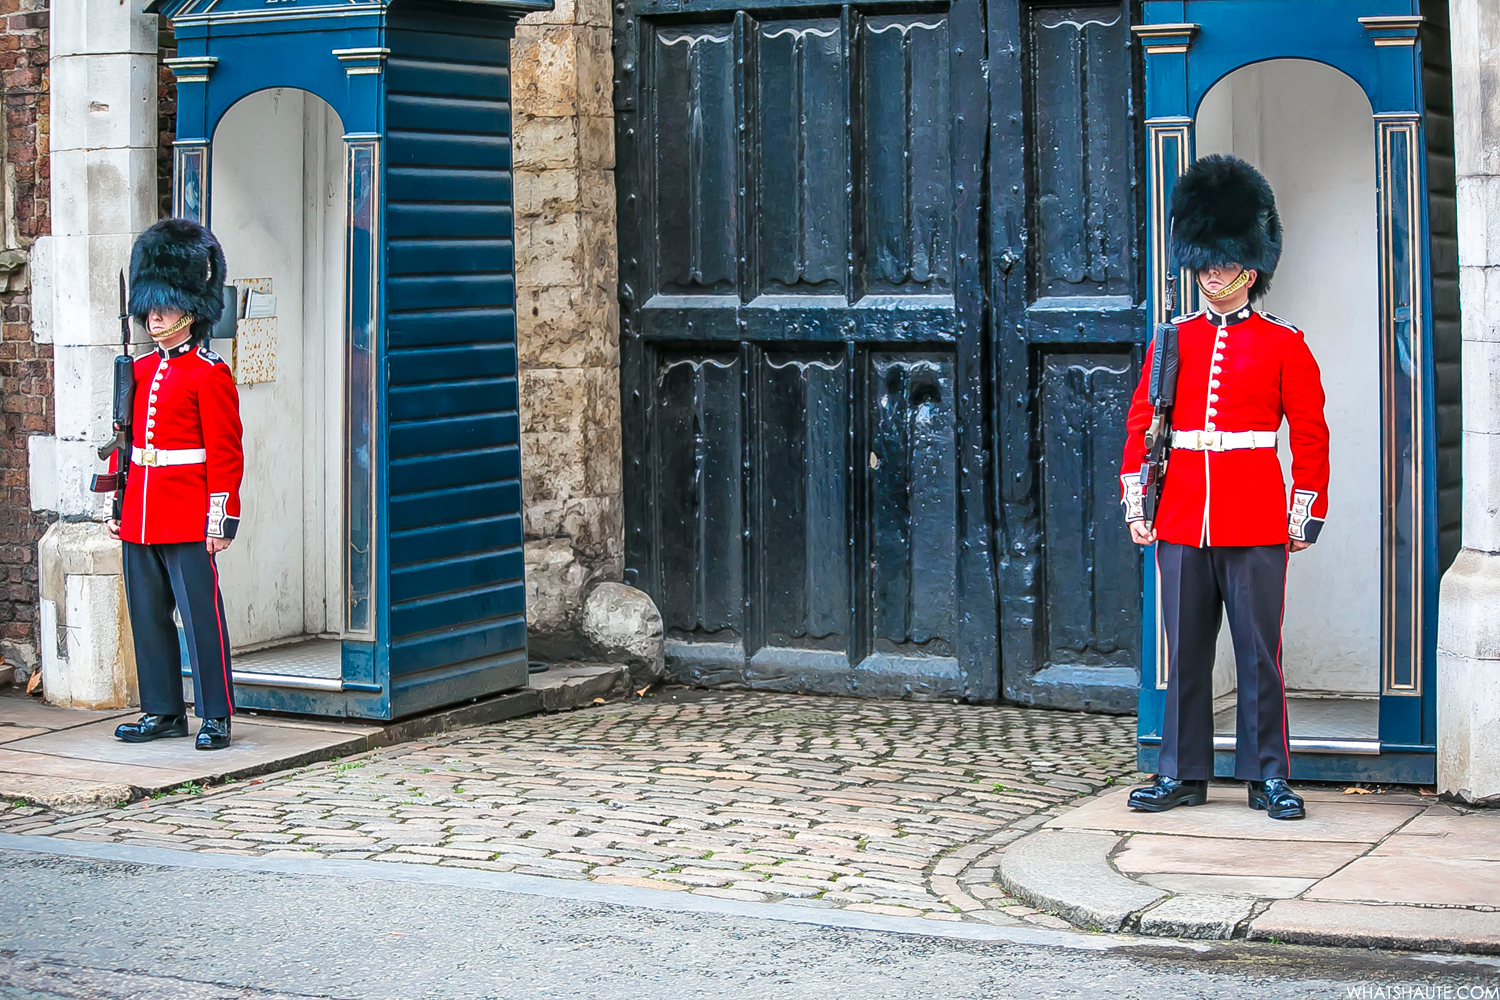 Guards boxes on Cleveland Row at St. James's Palace - London, England, What's Haute in the World